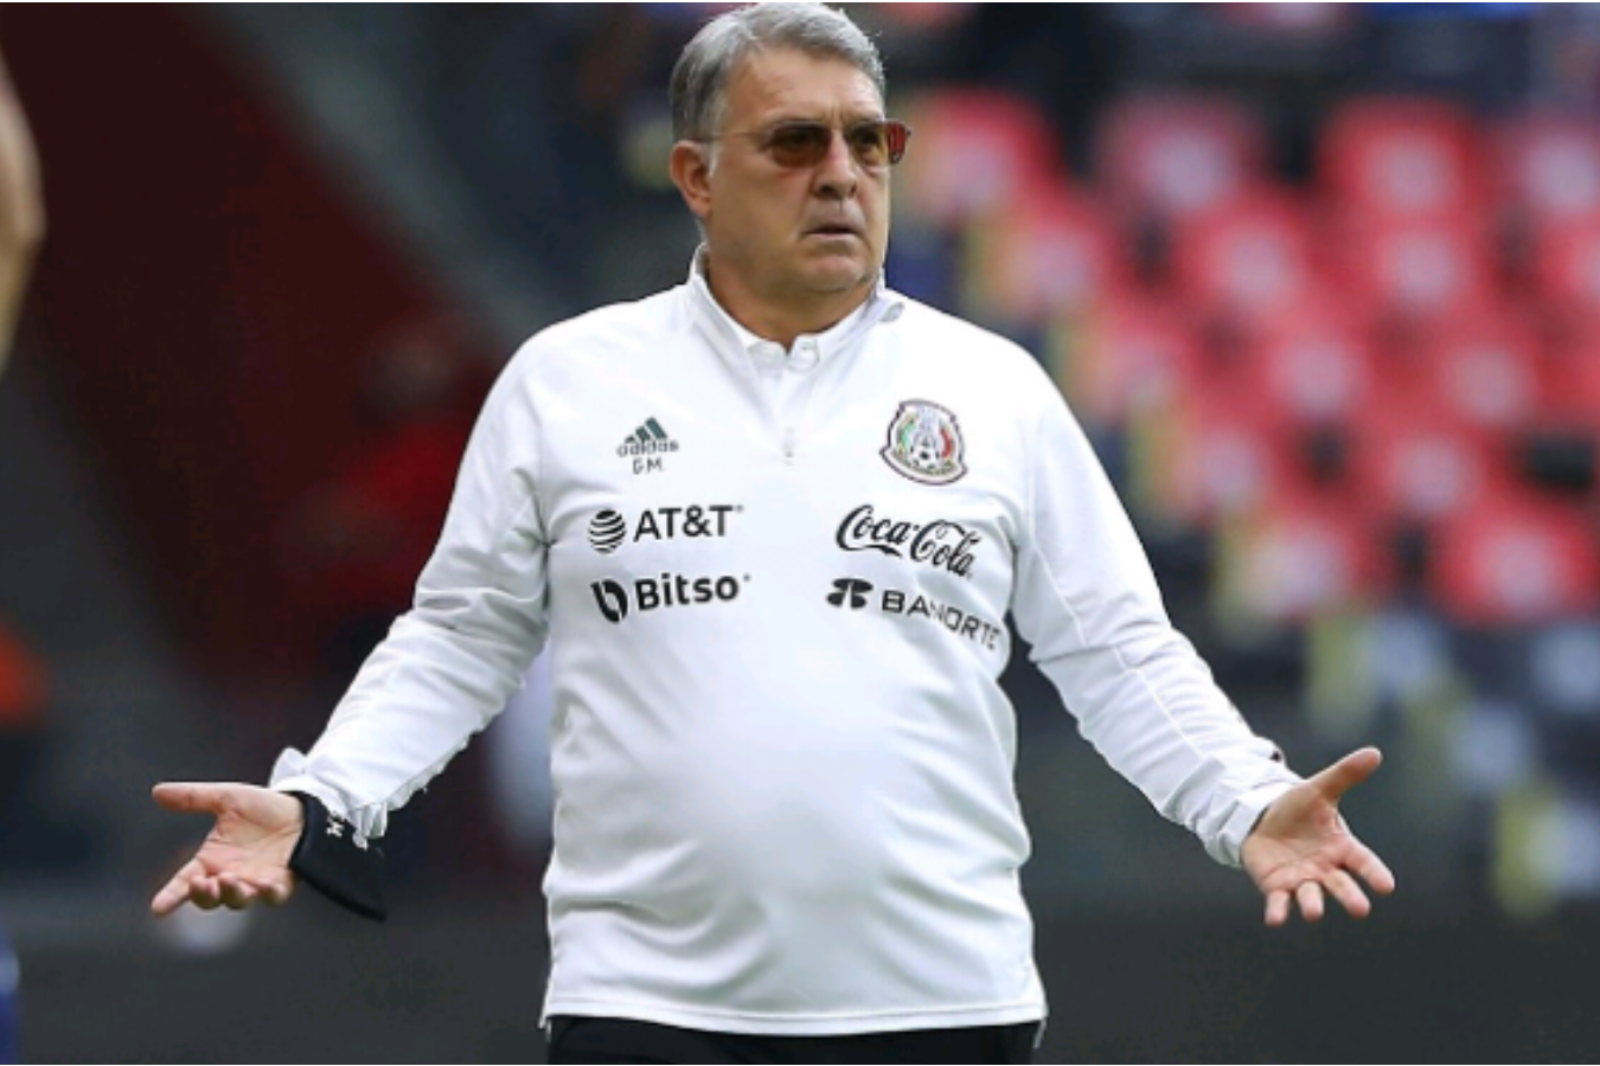 FMF has a replacement for Gerardo Martino if Mexico National Team doesn’t win against USMNT